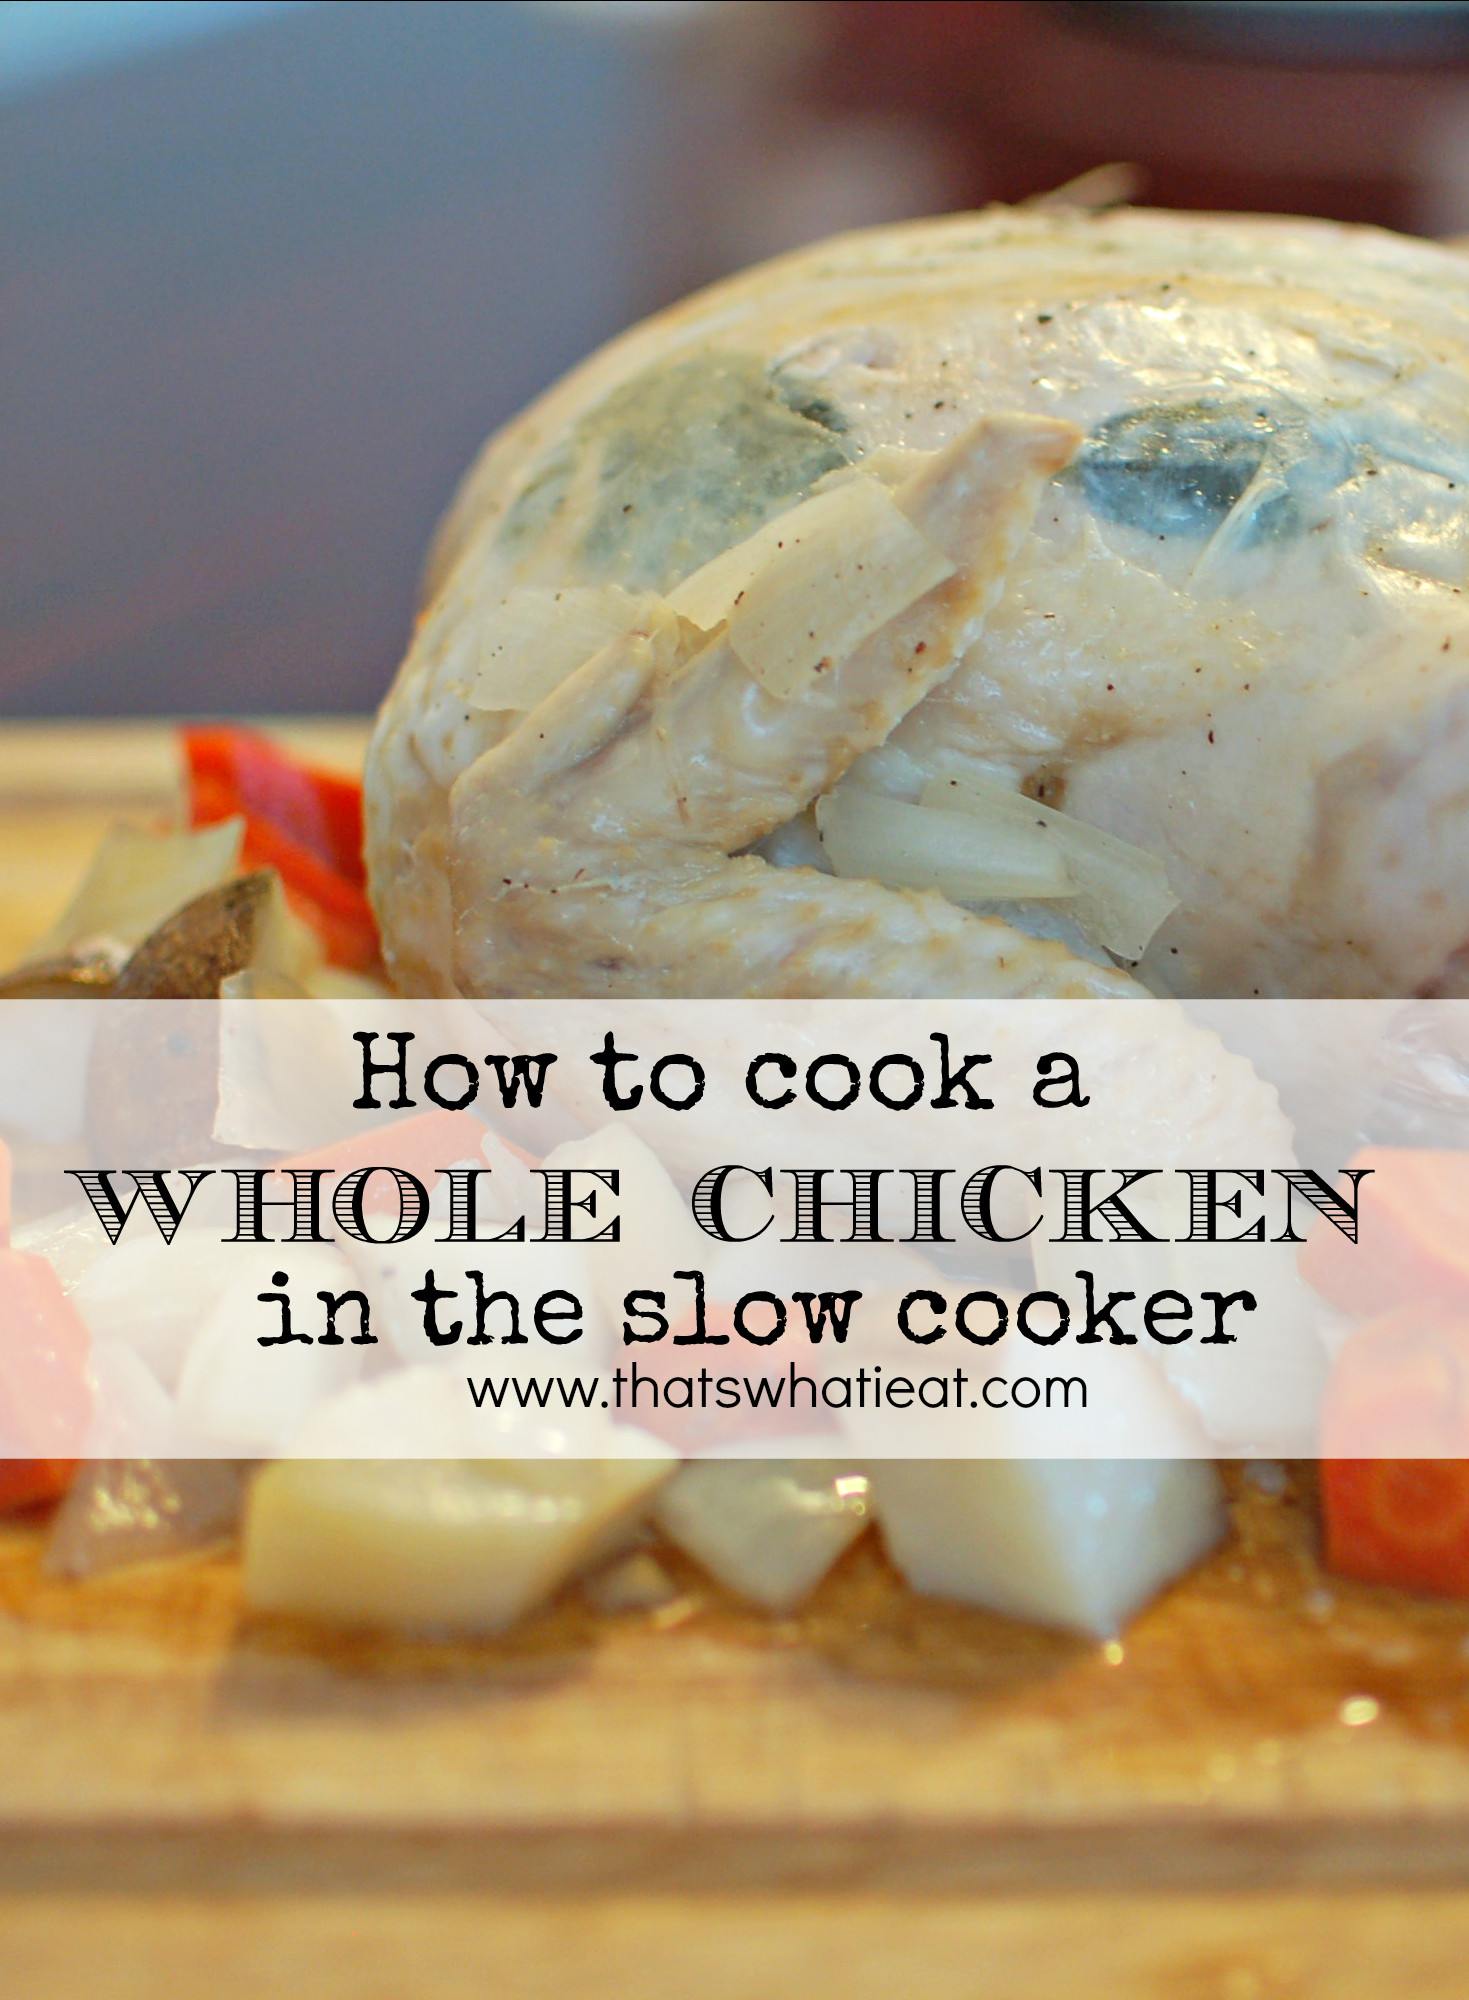 How Long Do You Cook A Whole Chicken
 How to cook a whole chicken in a crock pot That s What I Eat